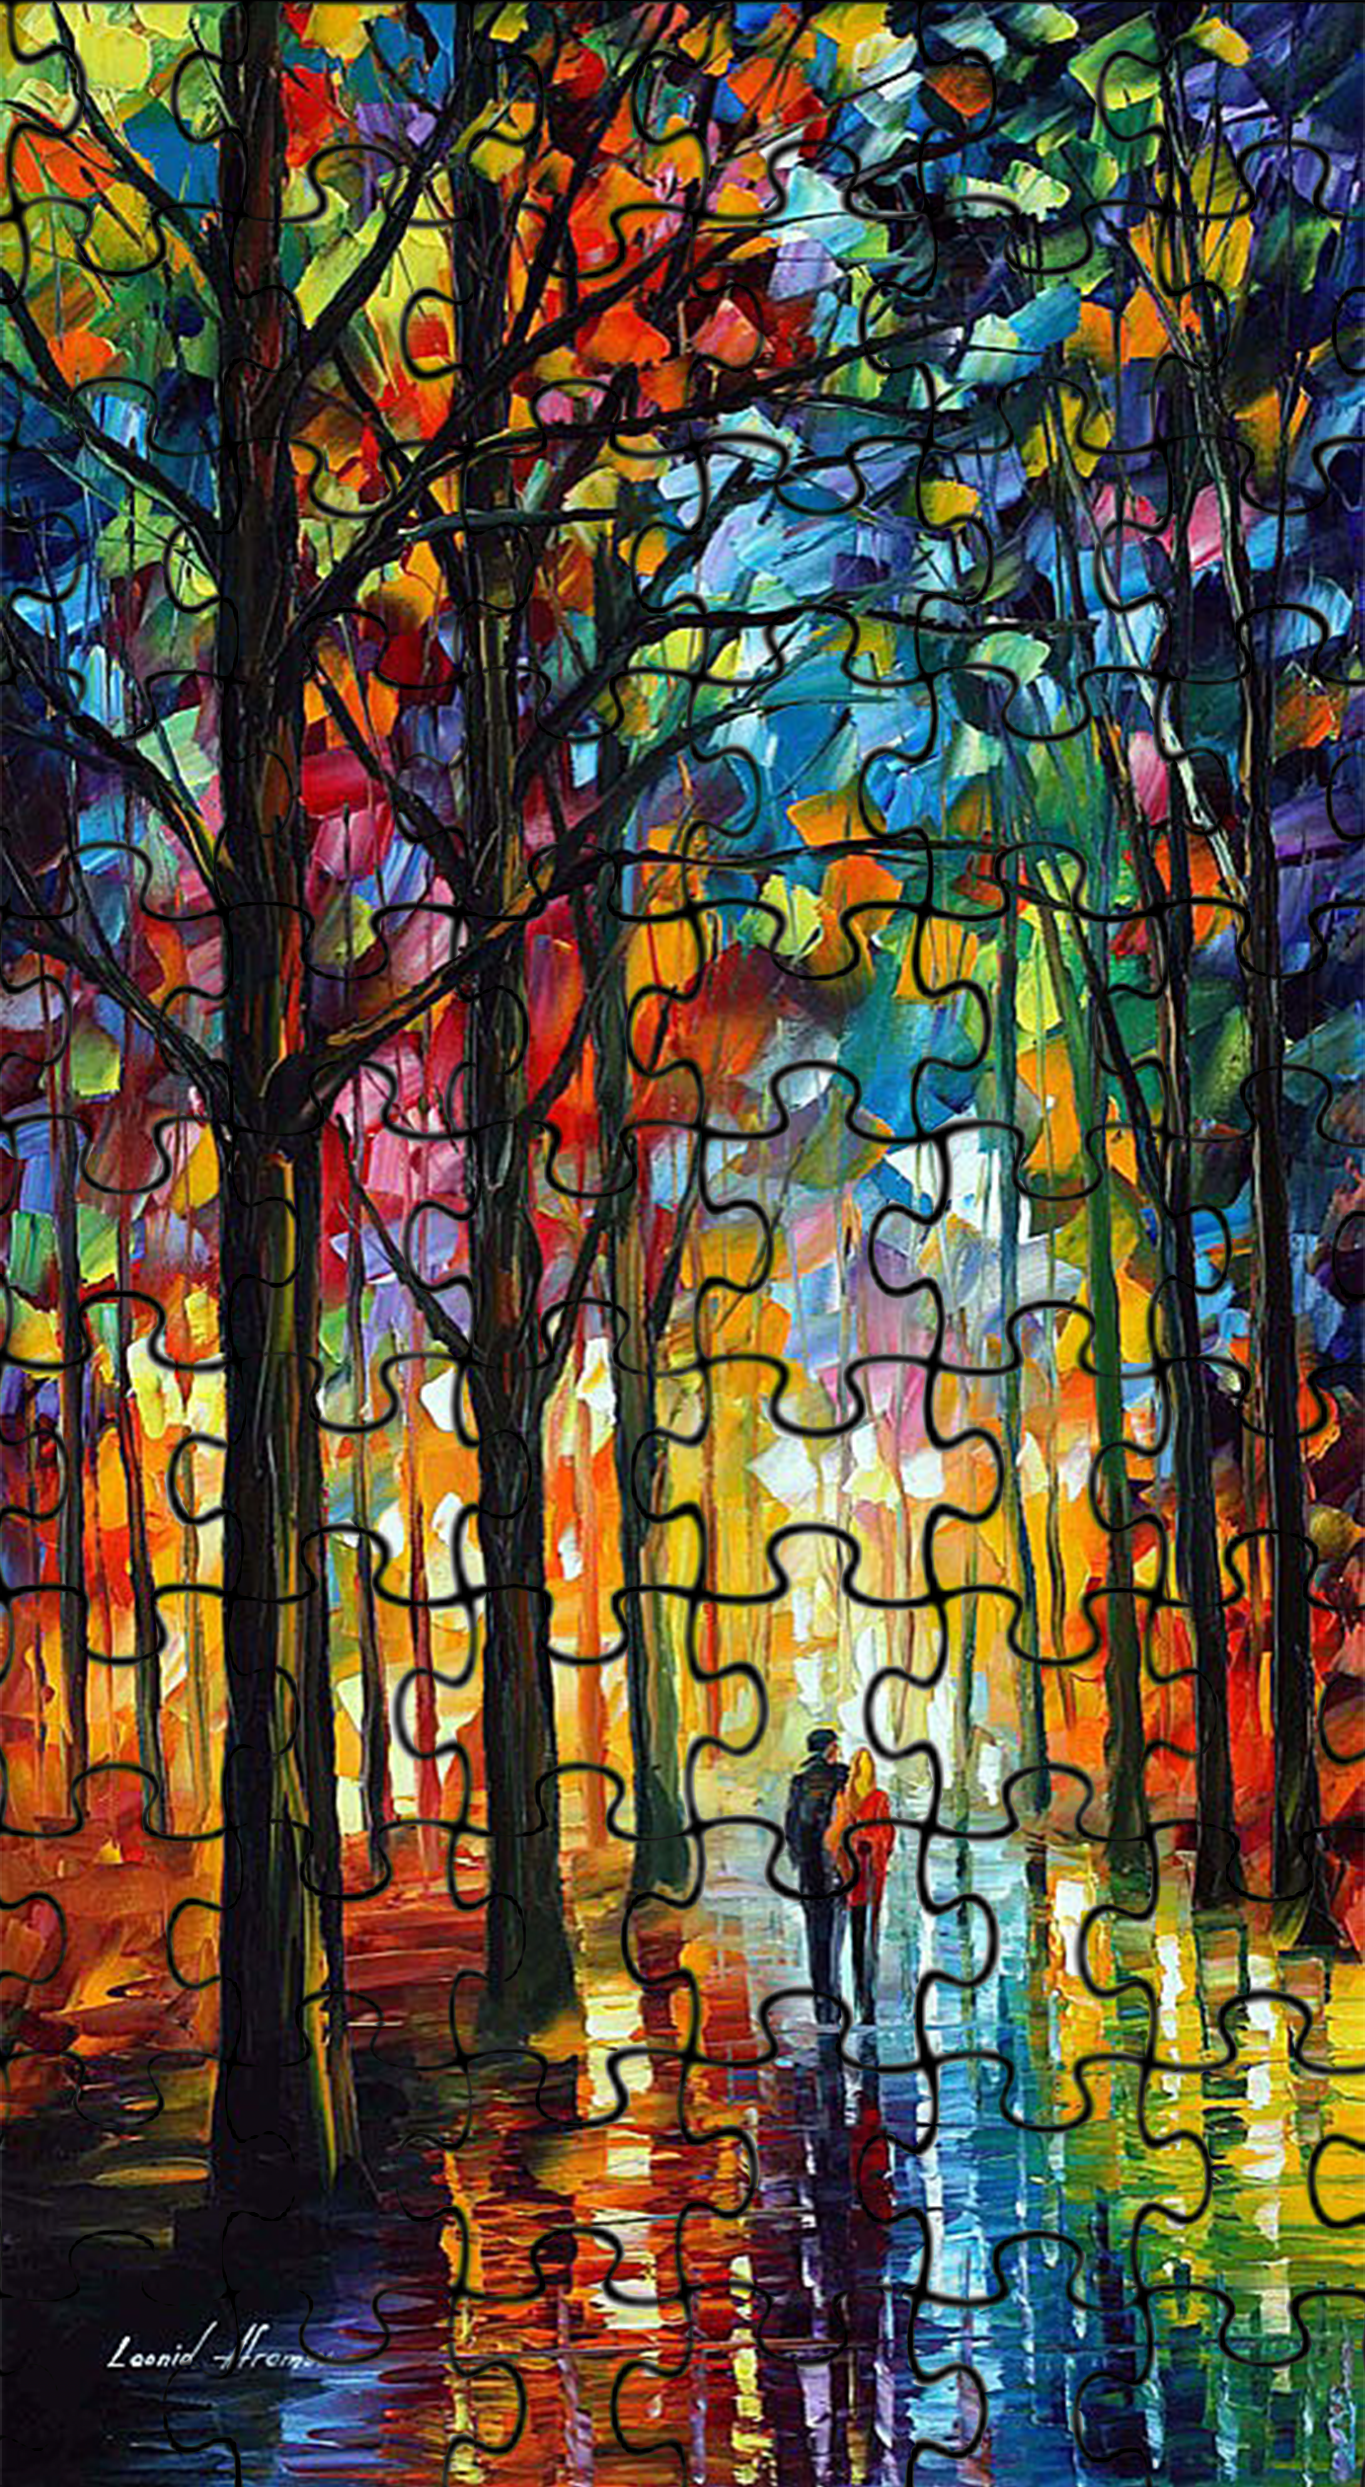 Leonid Afremov DATE IN THE PARK Puzzle Painting